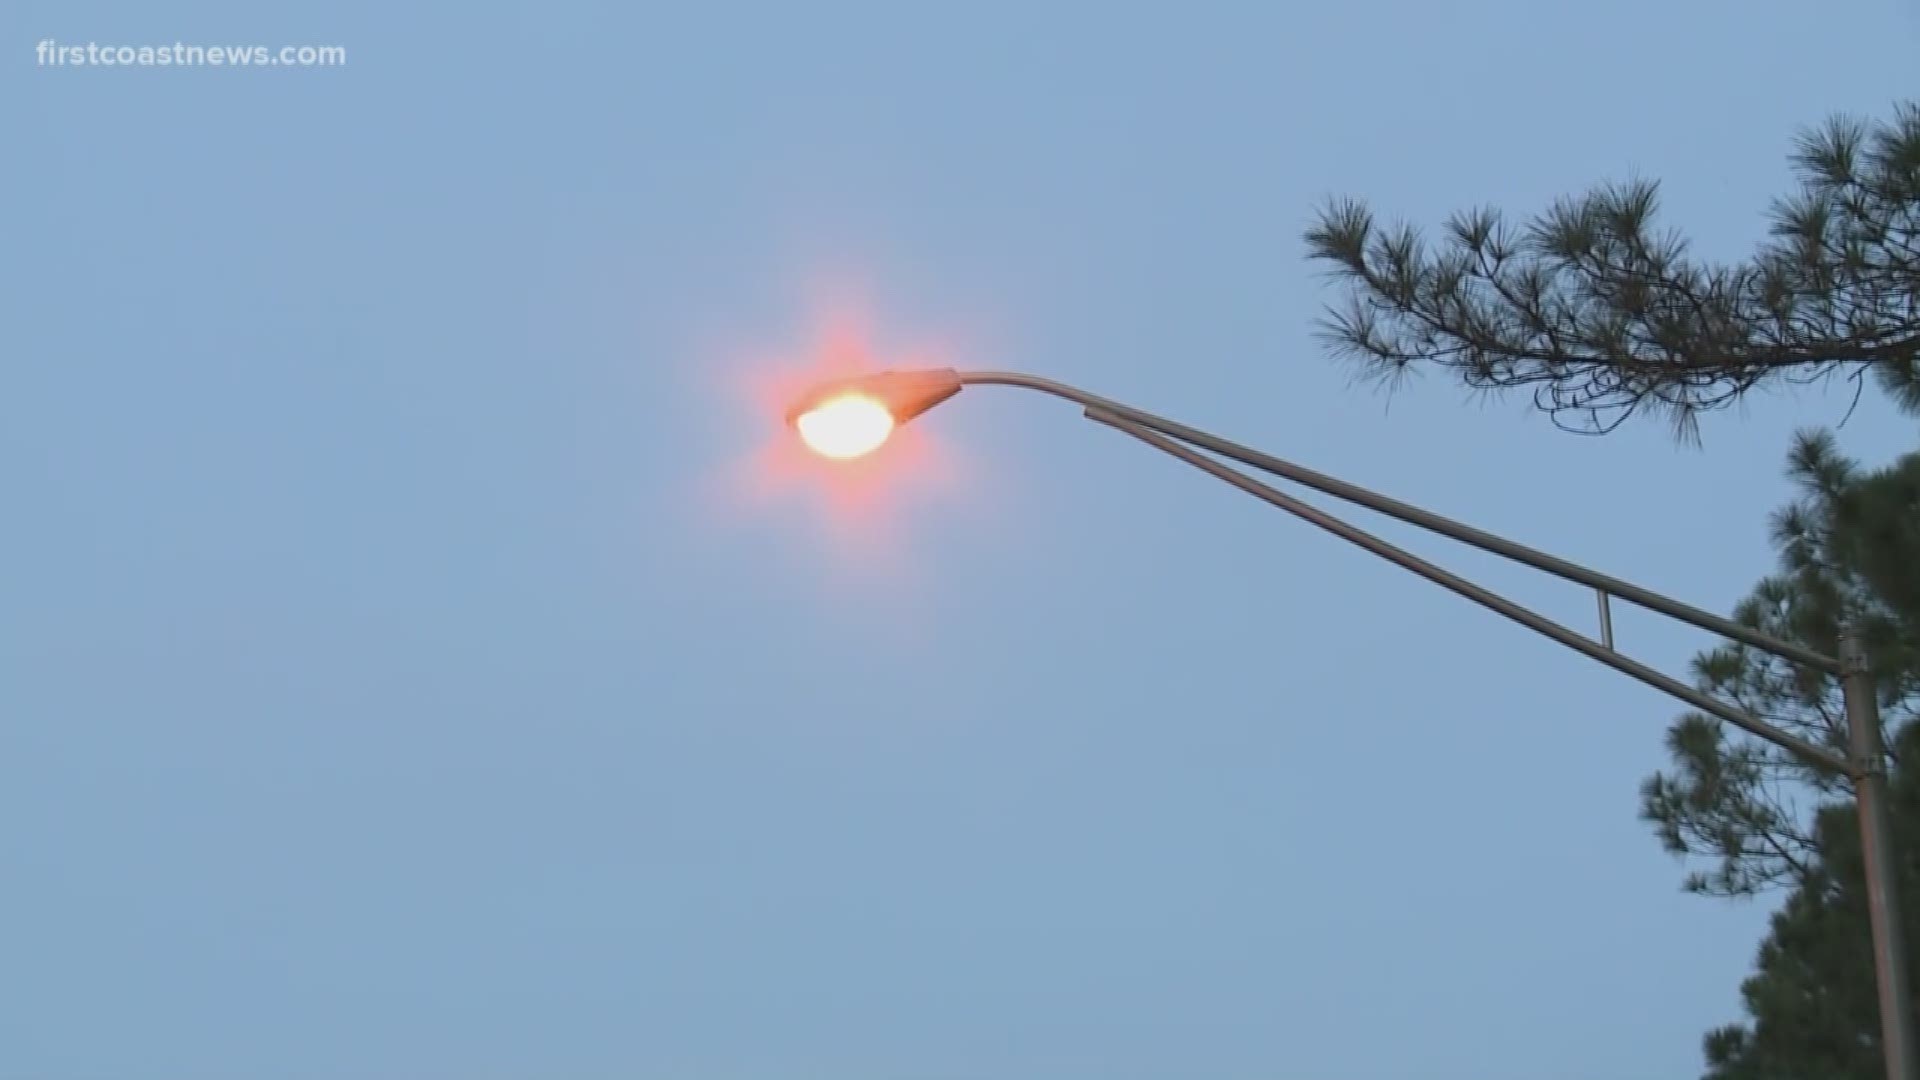 A viewer was concerned about the lack of working streetlights near Dunn Avenue in Northside, now we know whose responsibility it is to fix them.